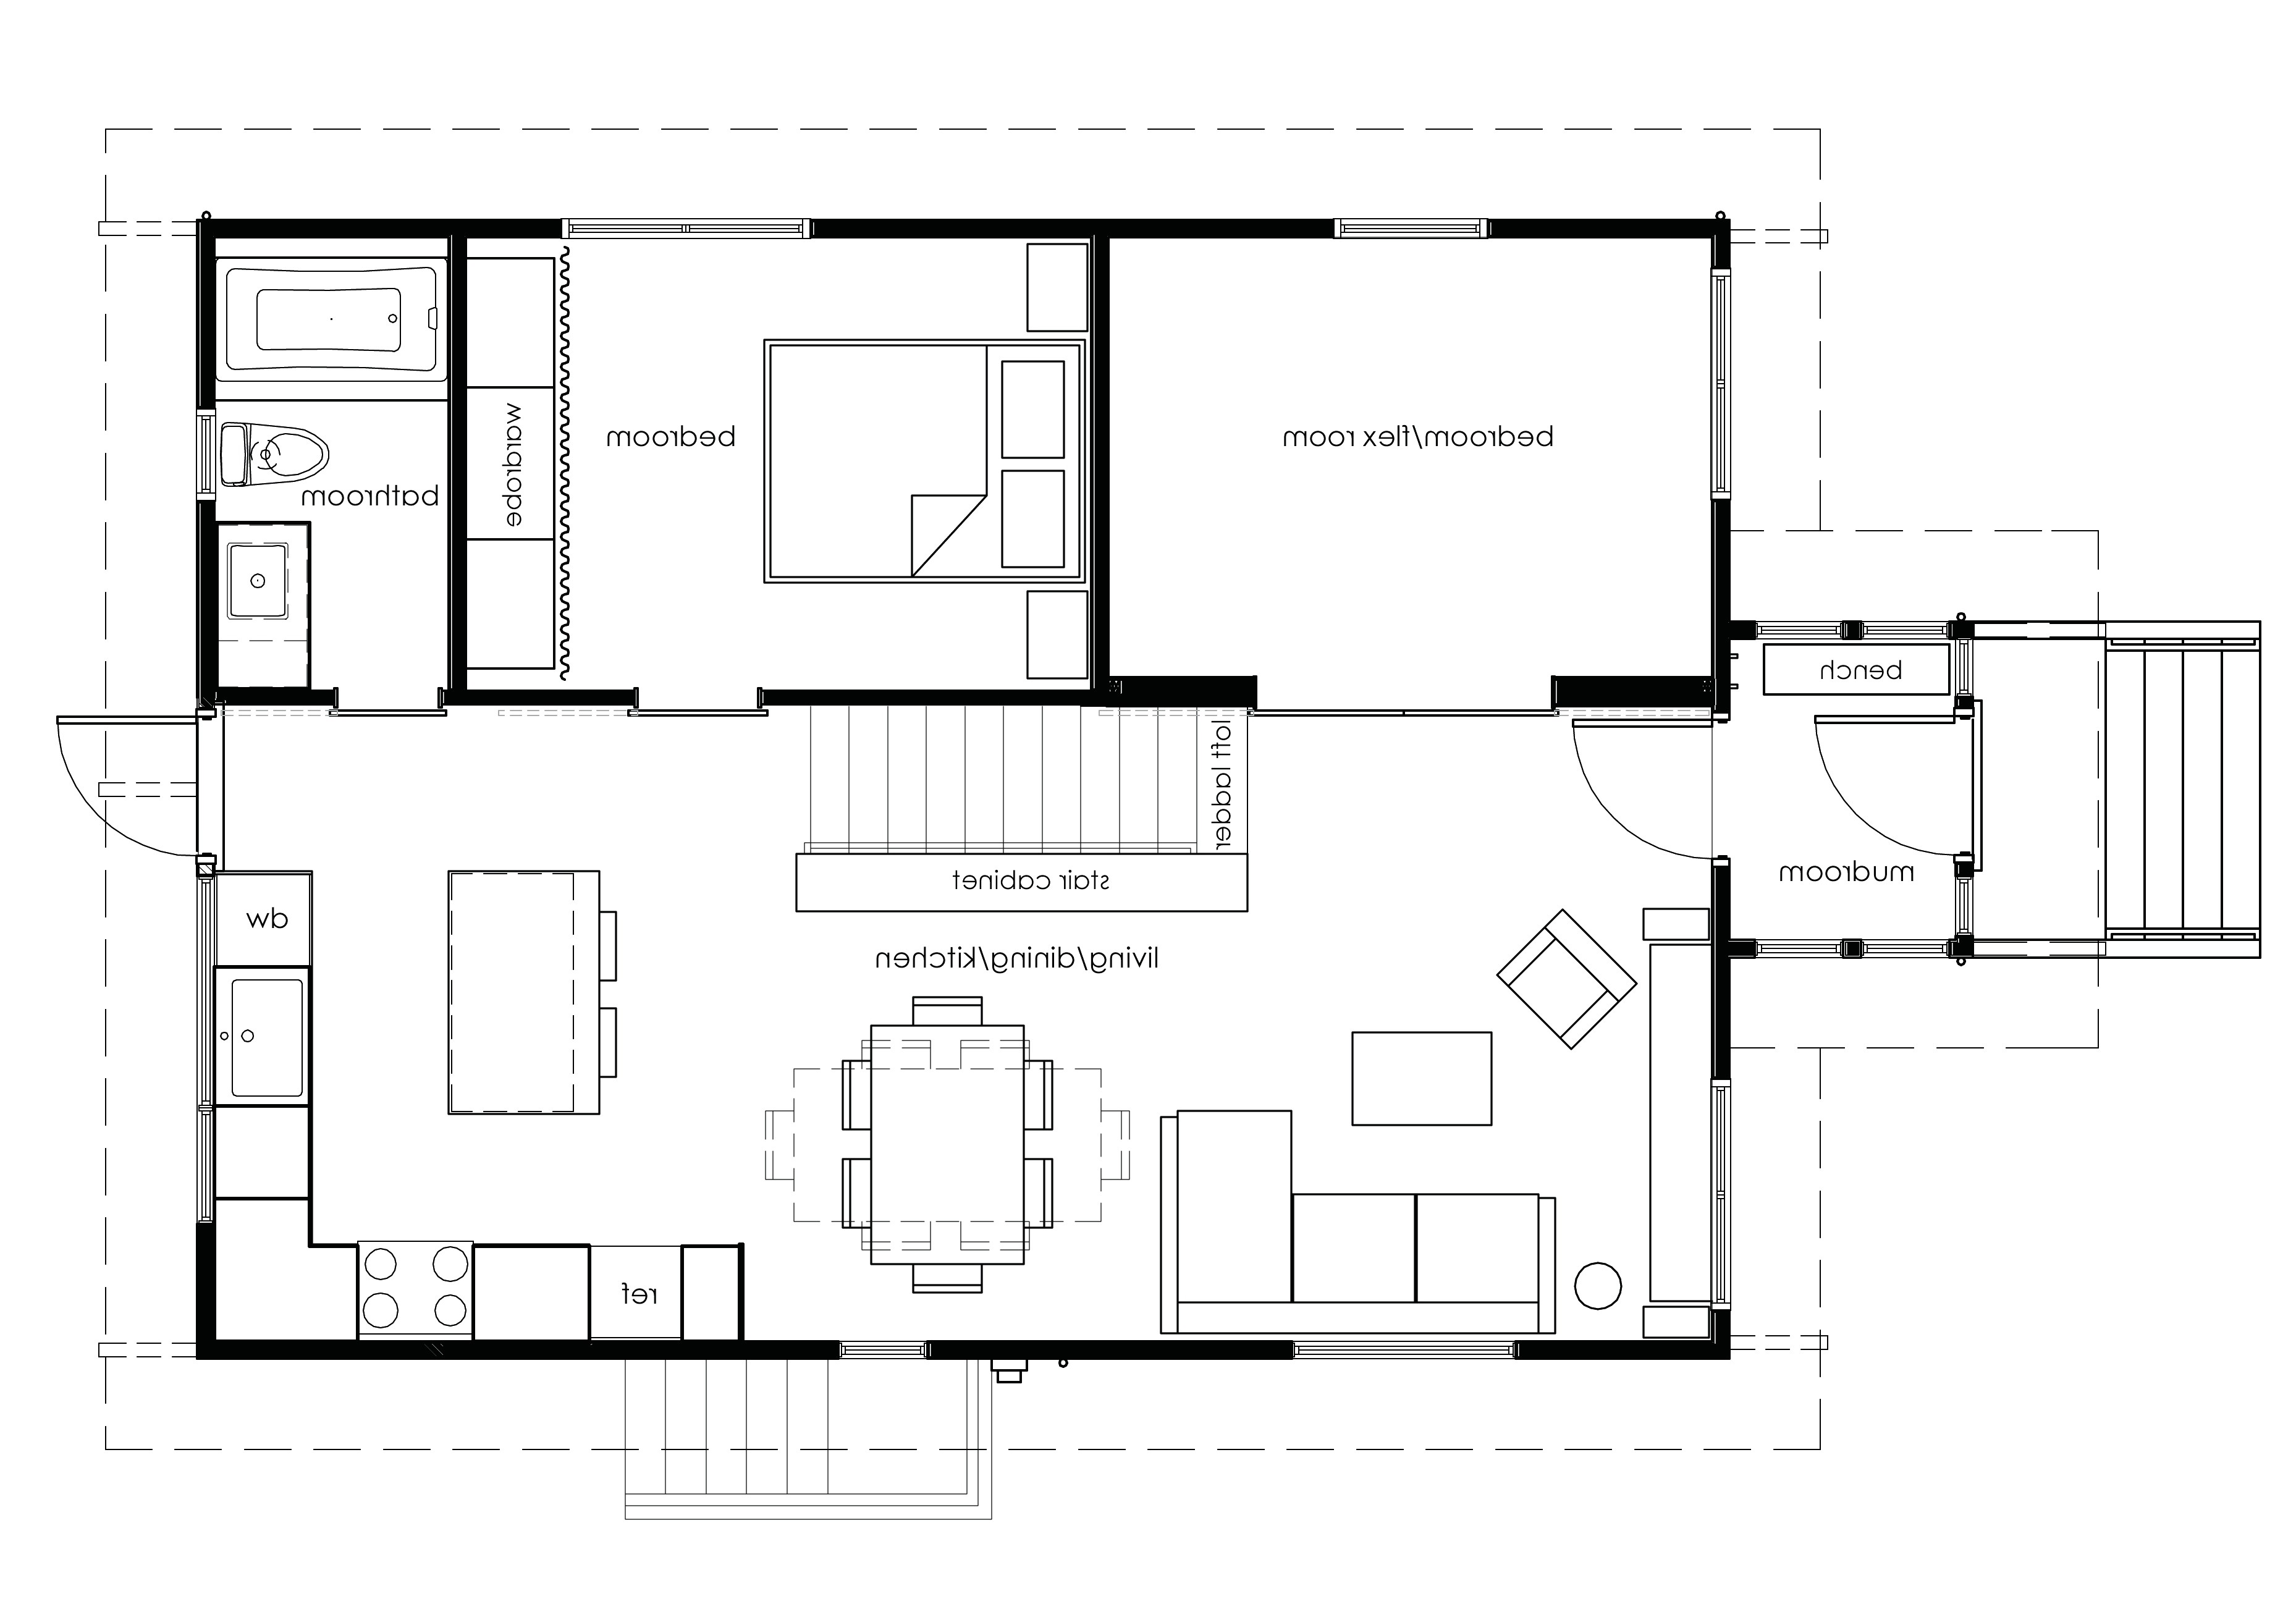 house plan drawing apps new sketch house plans android apps on google play